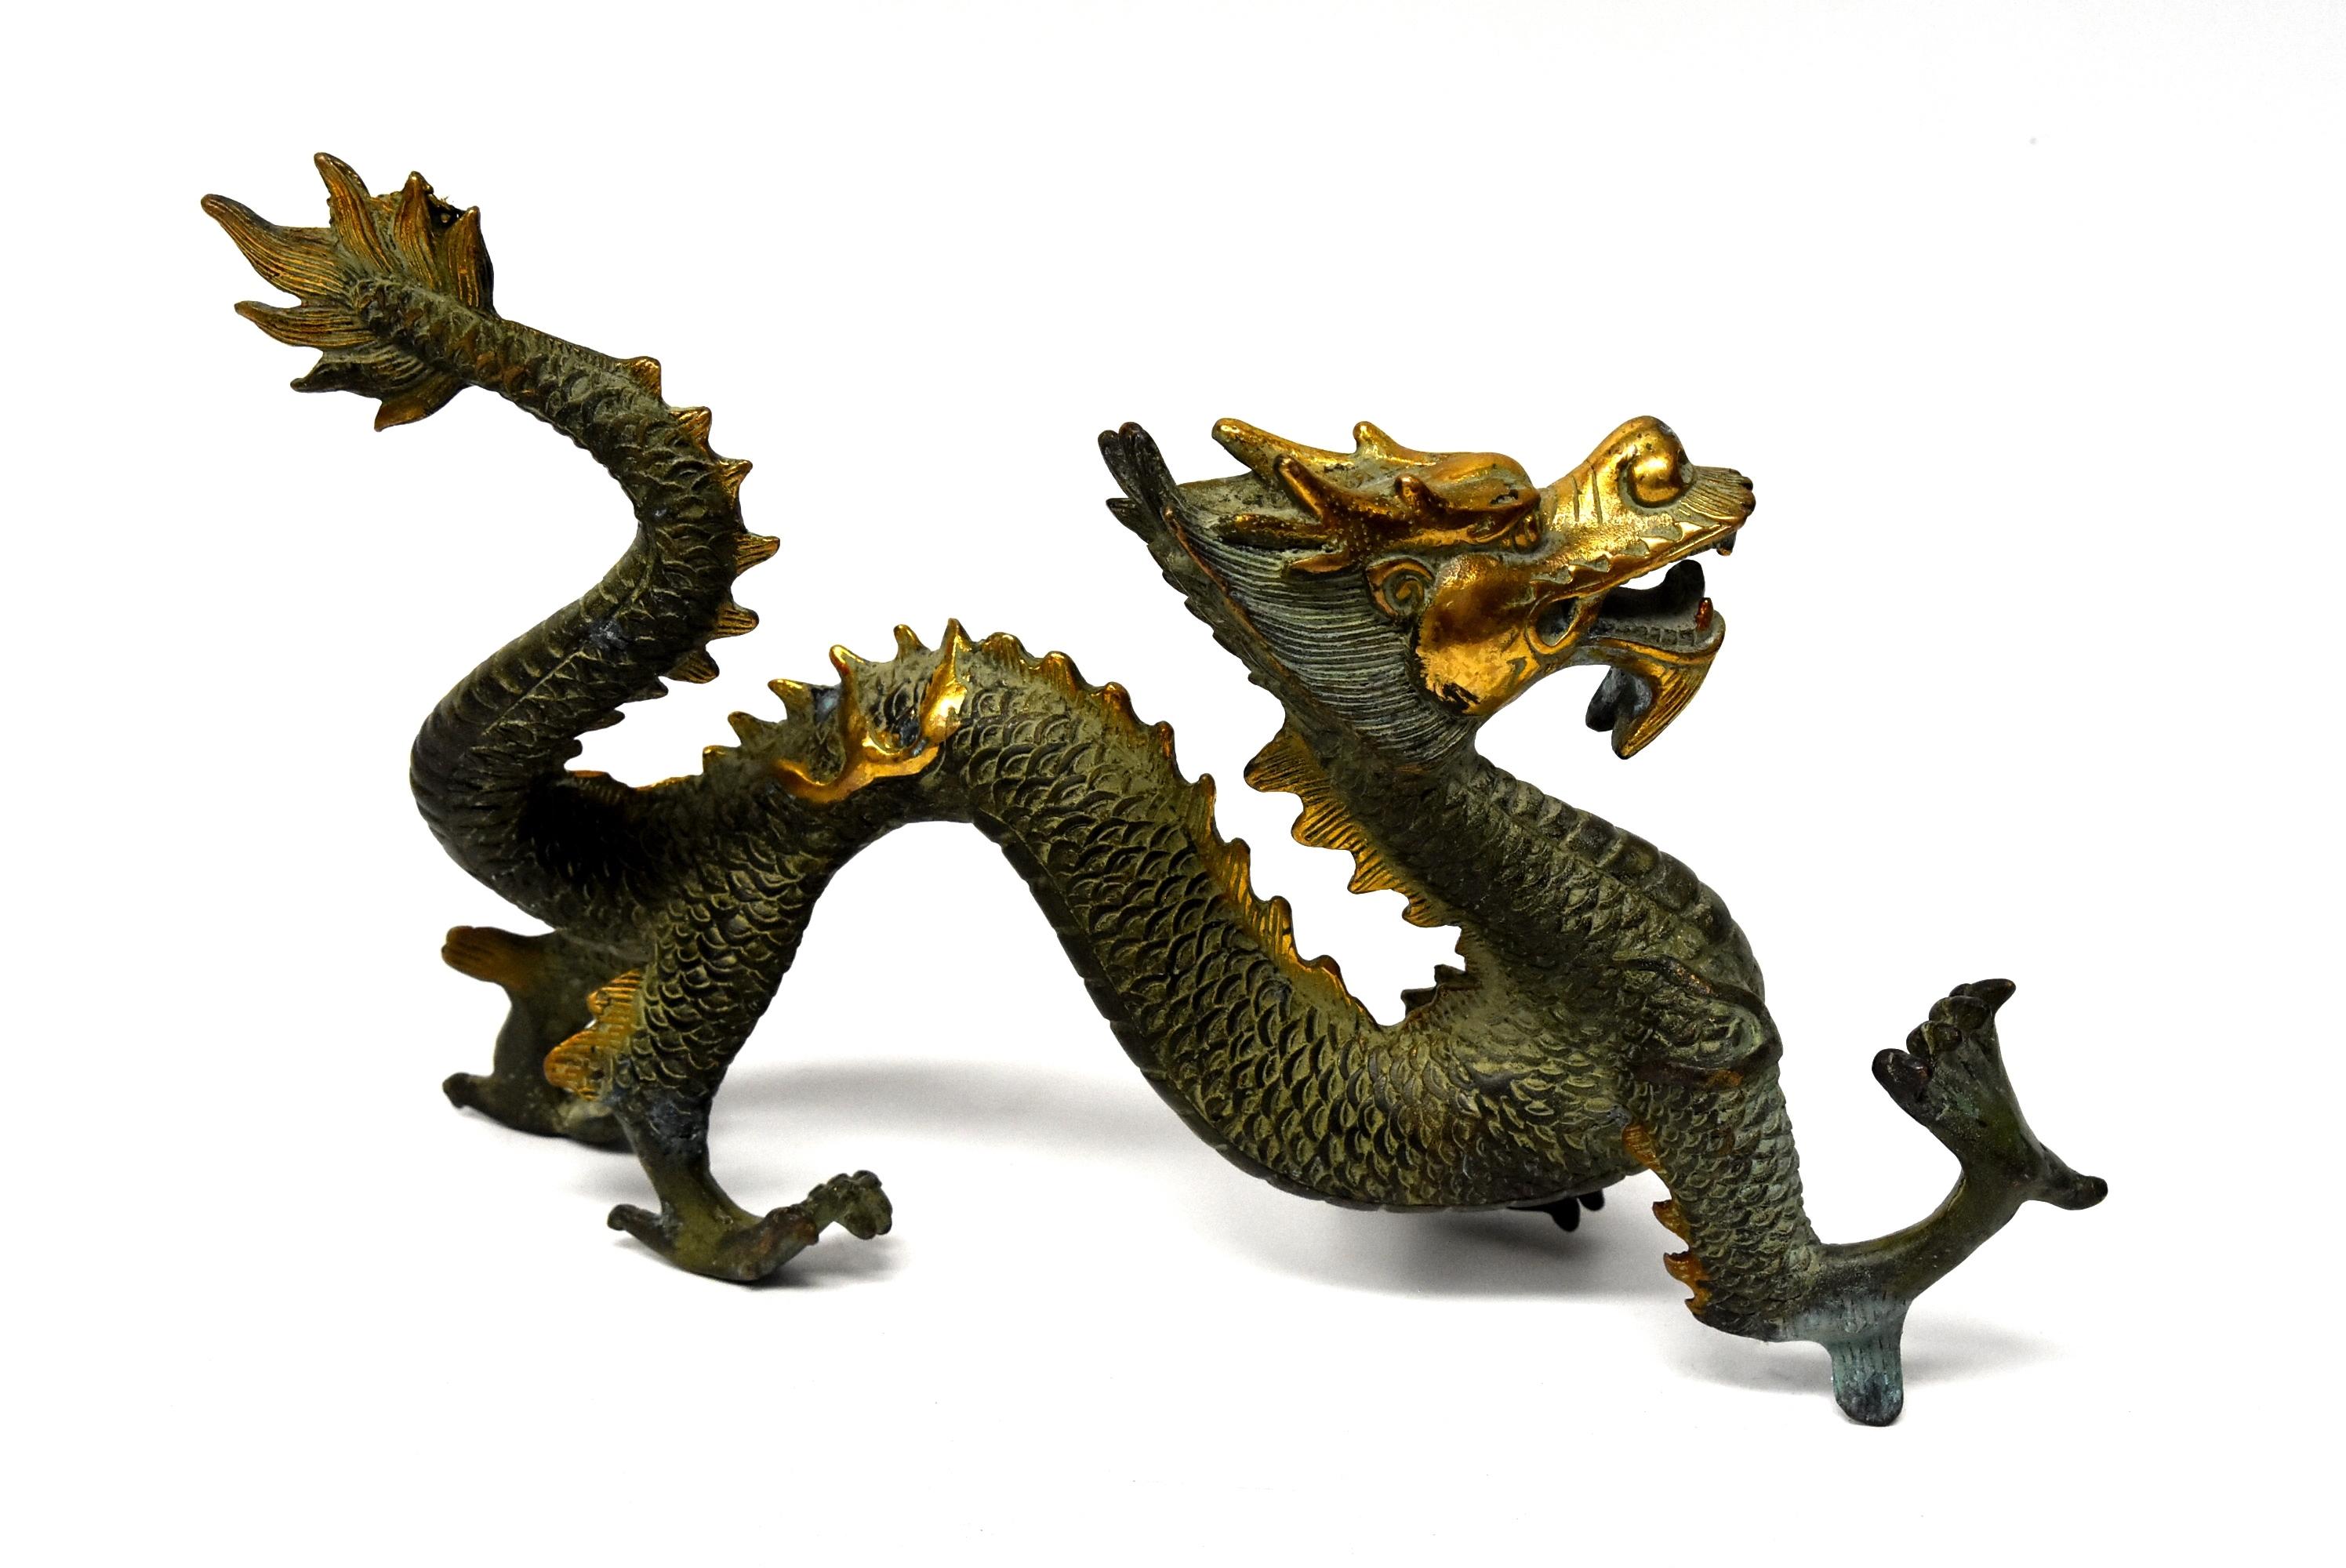 A handsome gilded green bronze dragon. The dragon is the symbol of the Chinese emperor. It represents power, strength and prosperity. This sculpture captures the dragon in motion of reaching forward, symbolizing attaining goal. Beautiful gilding